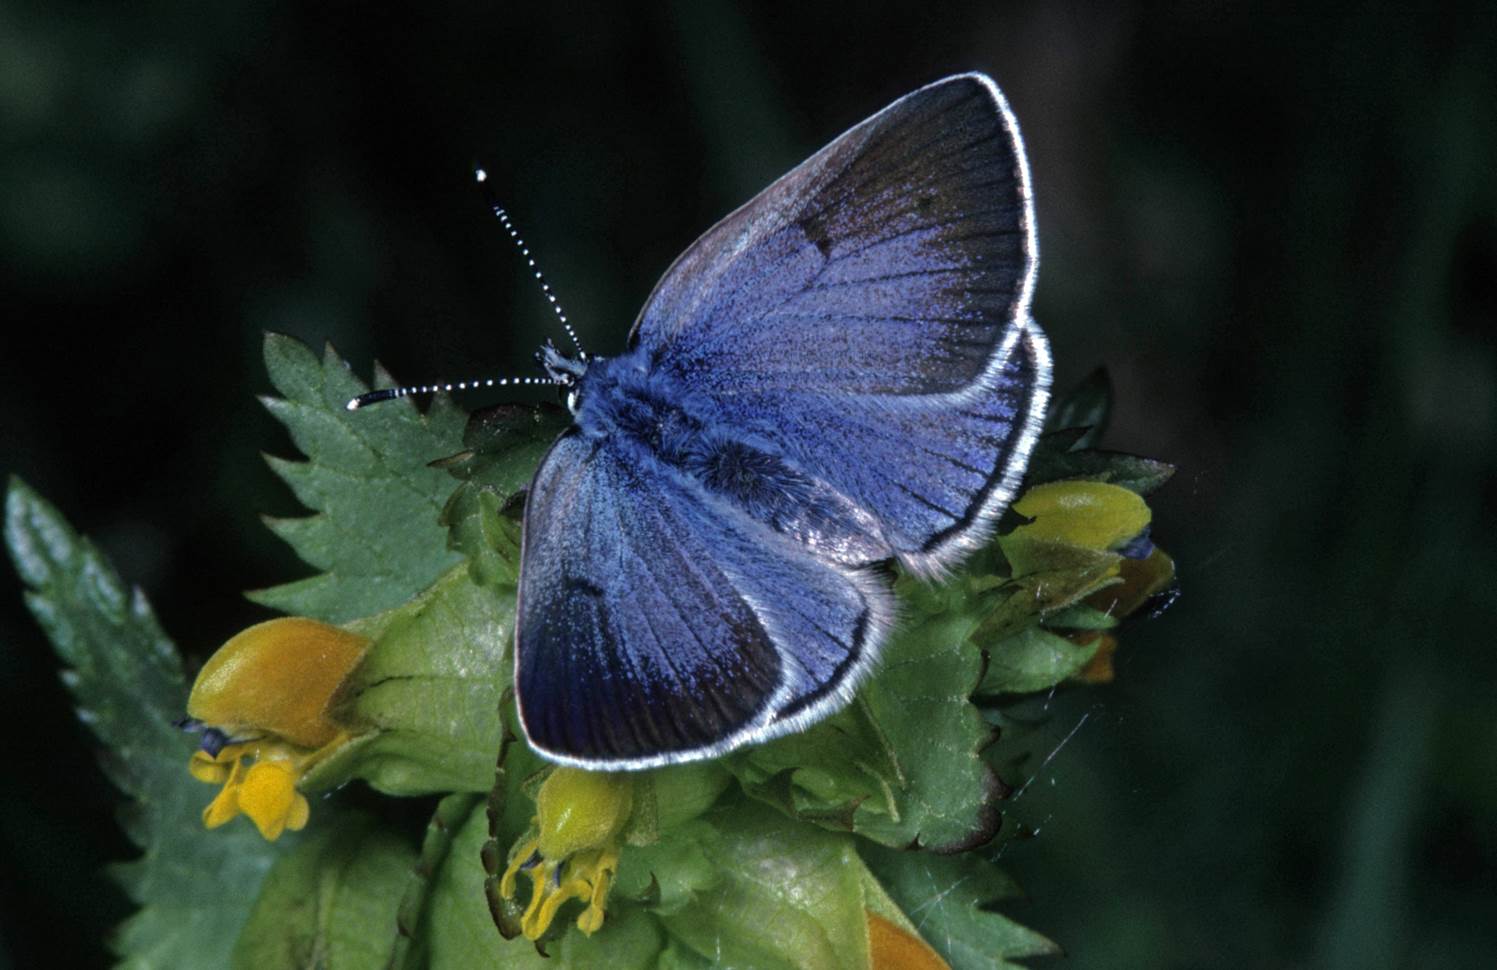 A butterfly on a plant

Description automatically generated with medium confidence